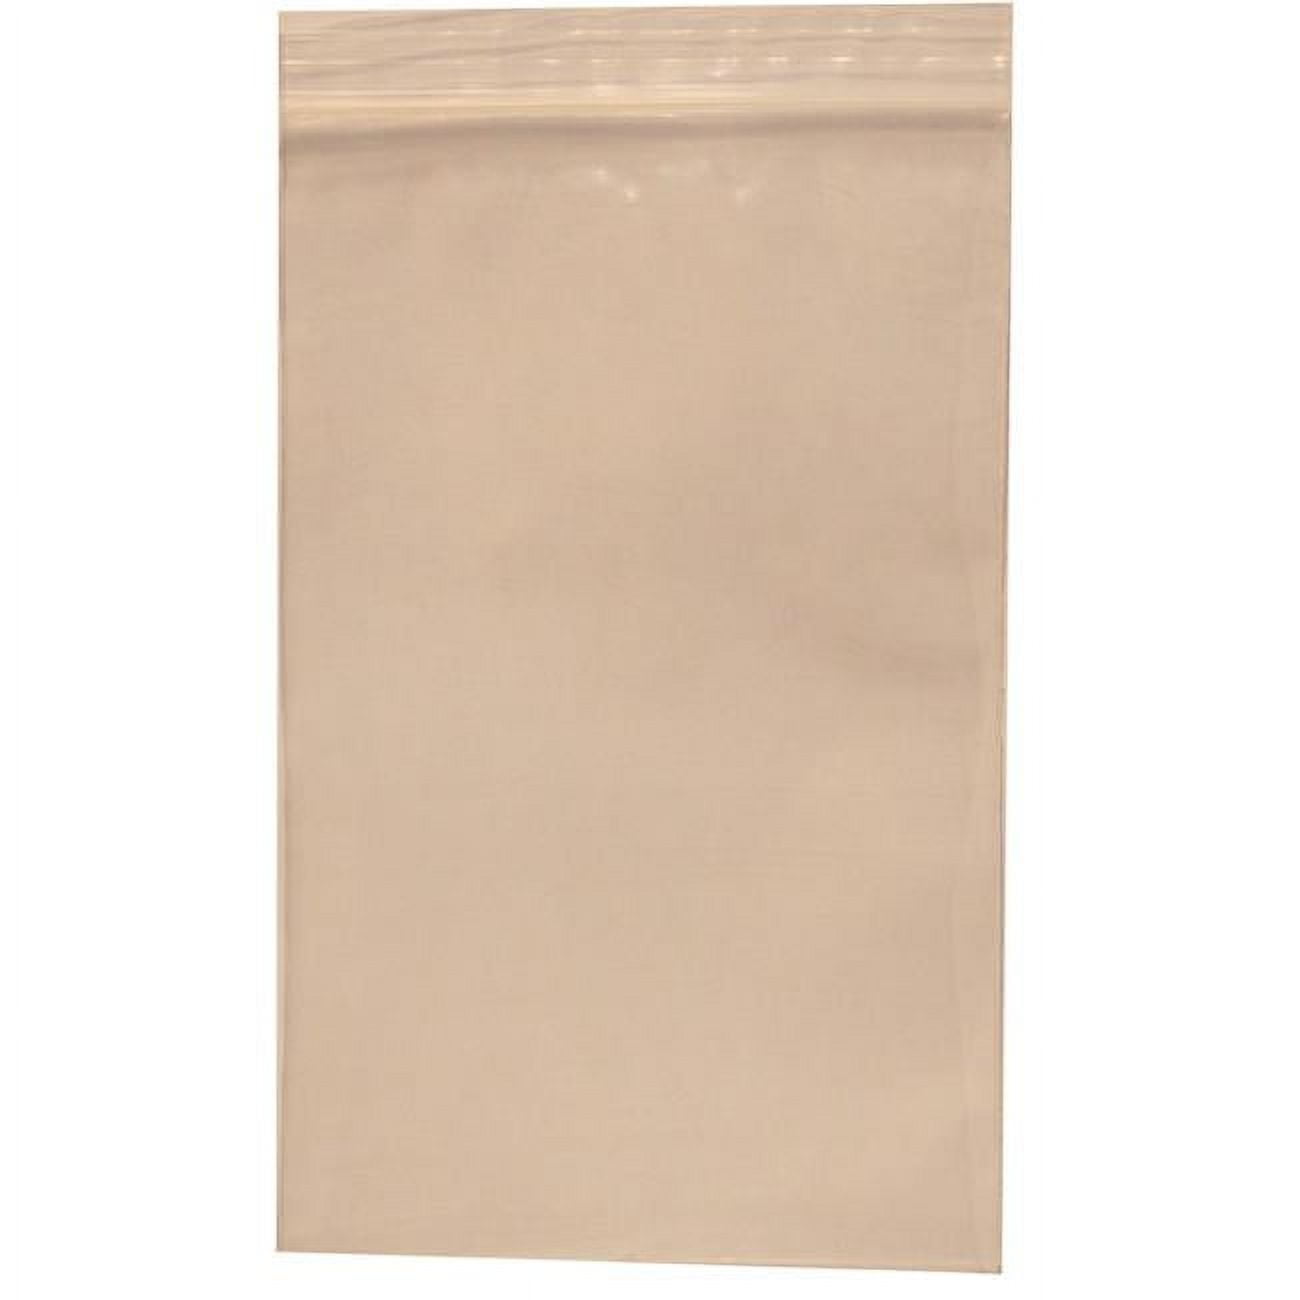 9 X 12 In. Reclosable Bag - Pack Of 1000